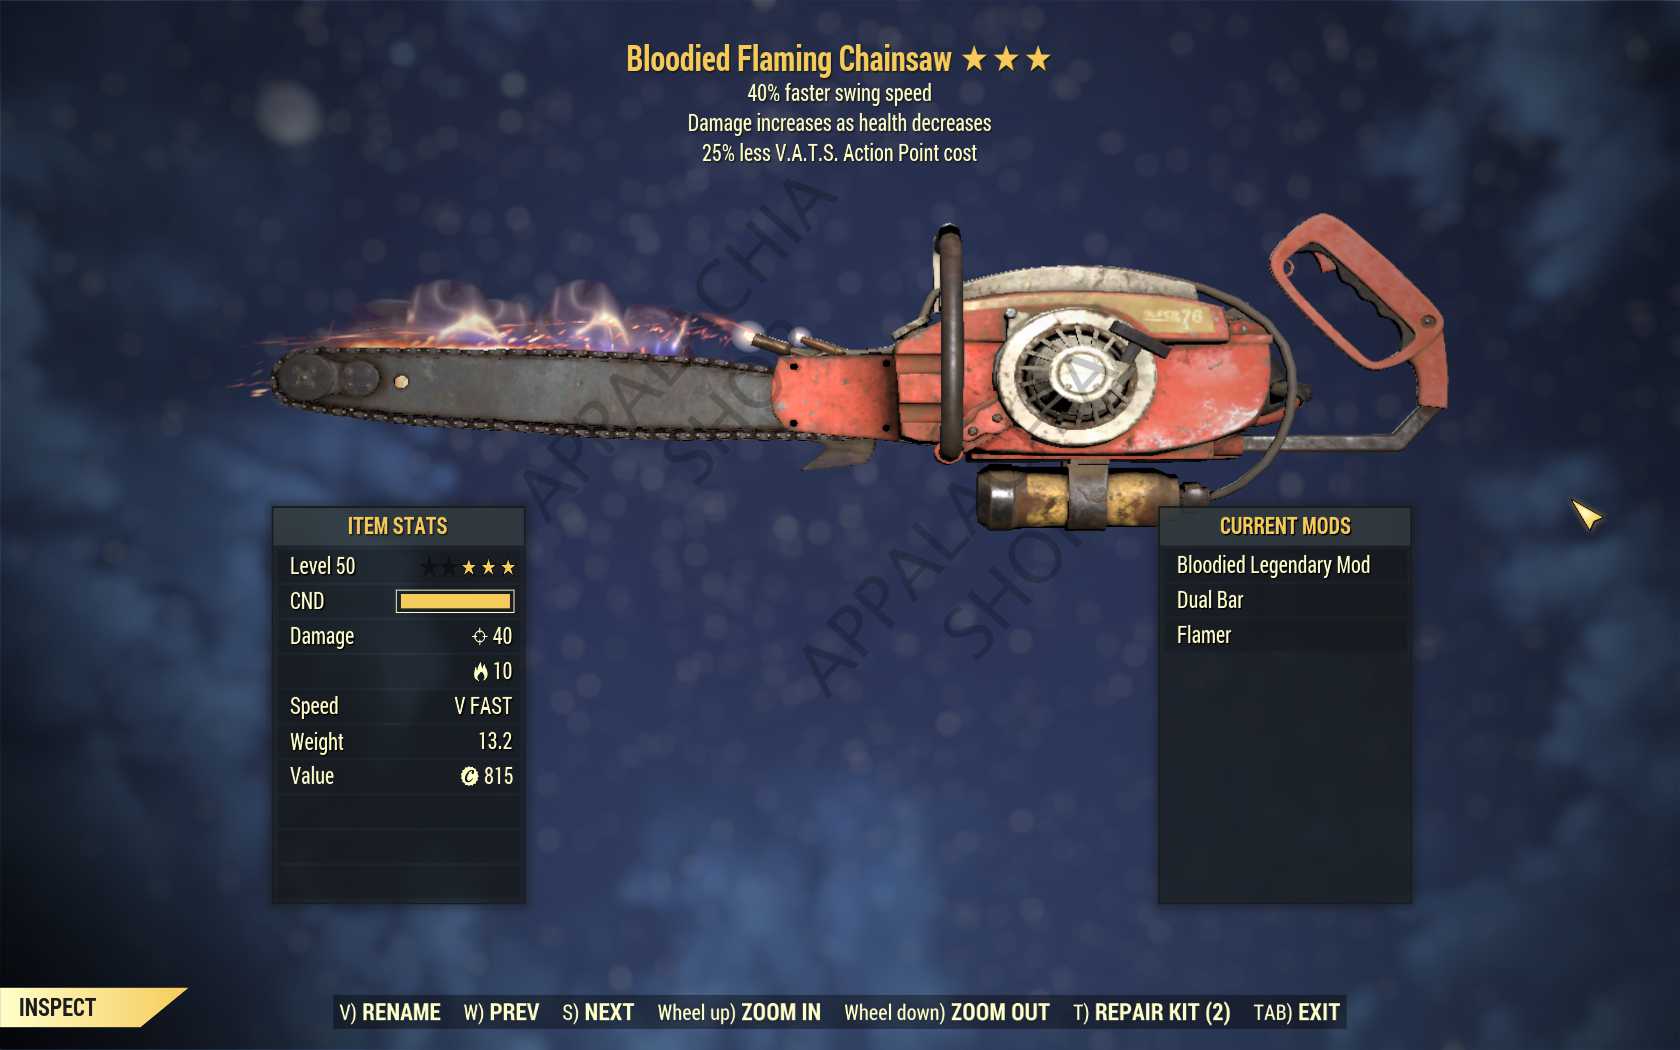 Bloodied Chainsaw (40% Faster Swing Speed, 25% less VATS AP cost)